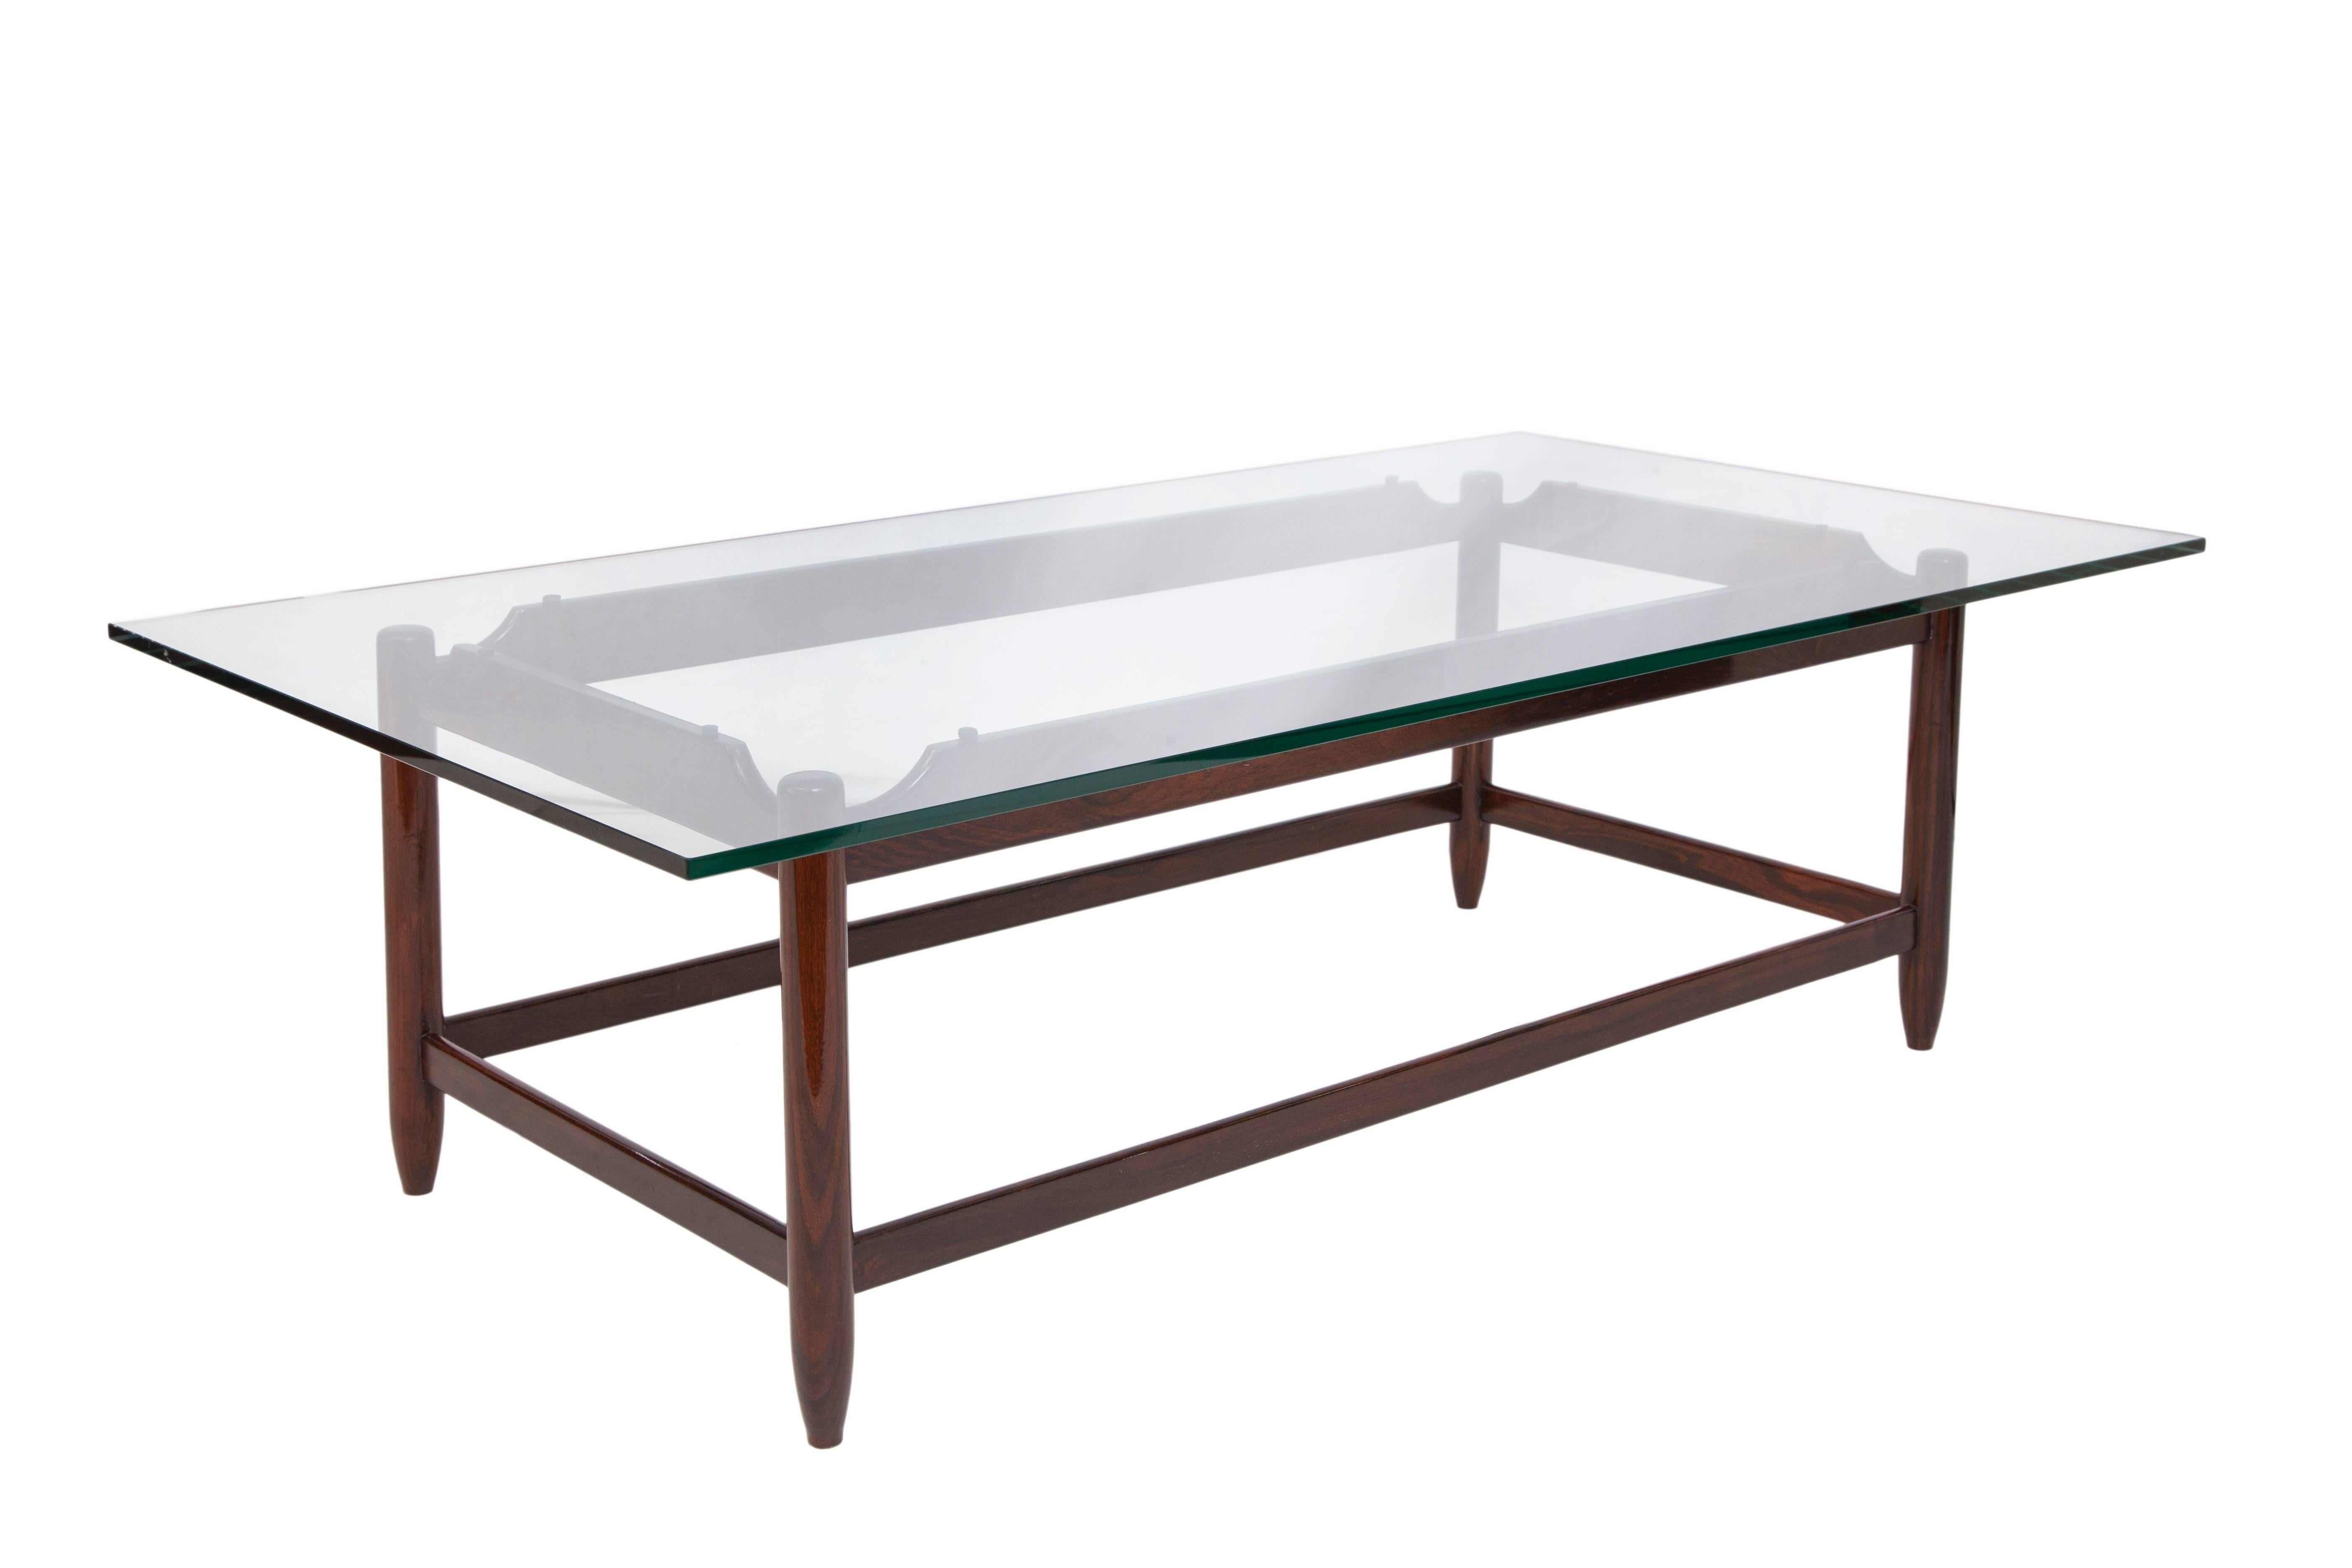 A vintage highly modernistic glass top coffee table, produced circa 1960s by Brazilian architect and designer Sergio Rodrigues, on jacaranda wood base, with stretcher poles and tapered legs. Good vintage condition, consistent with age and use.